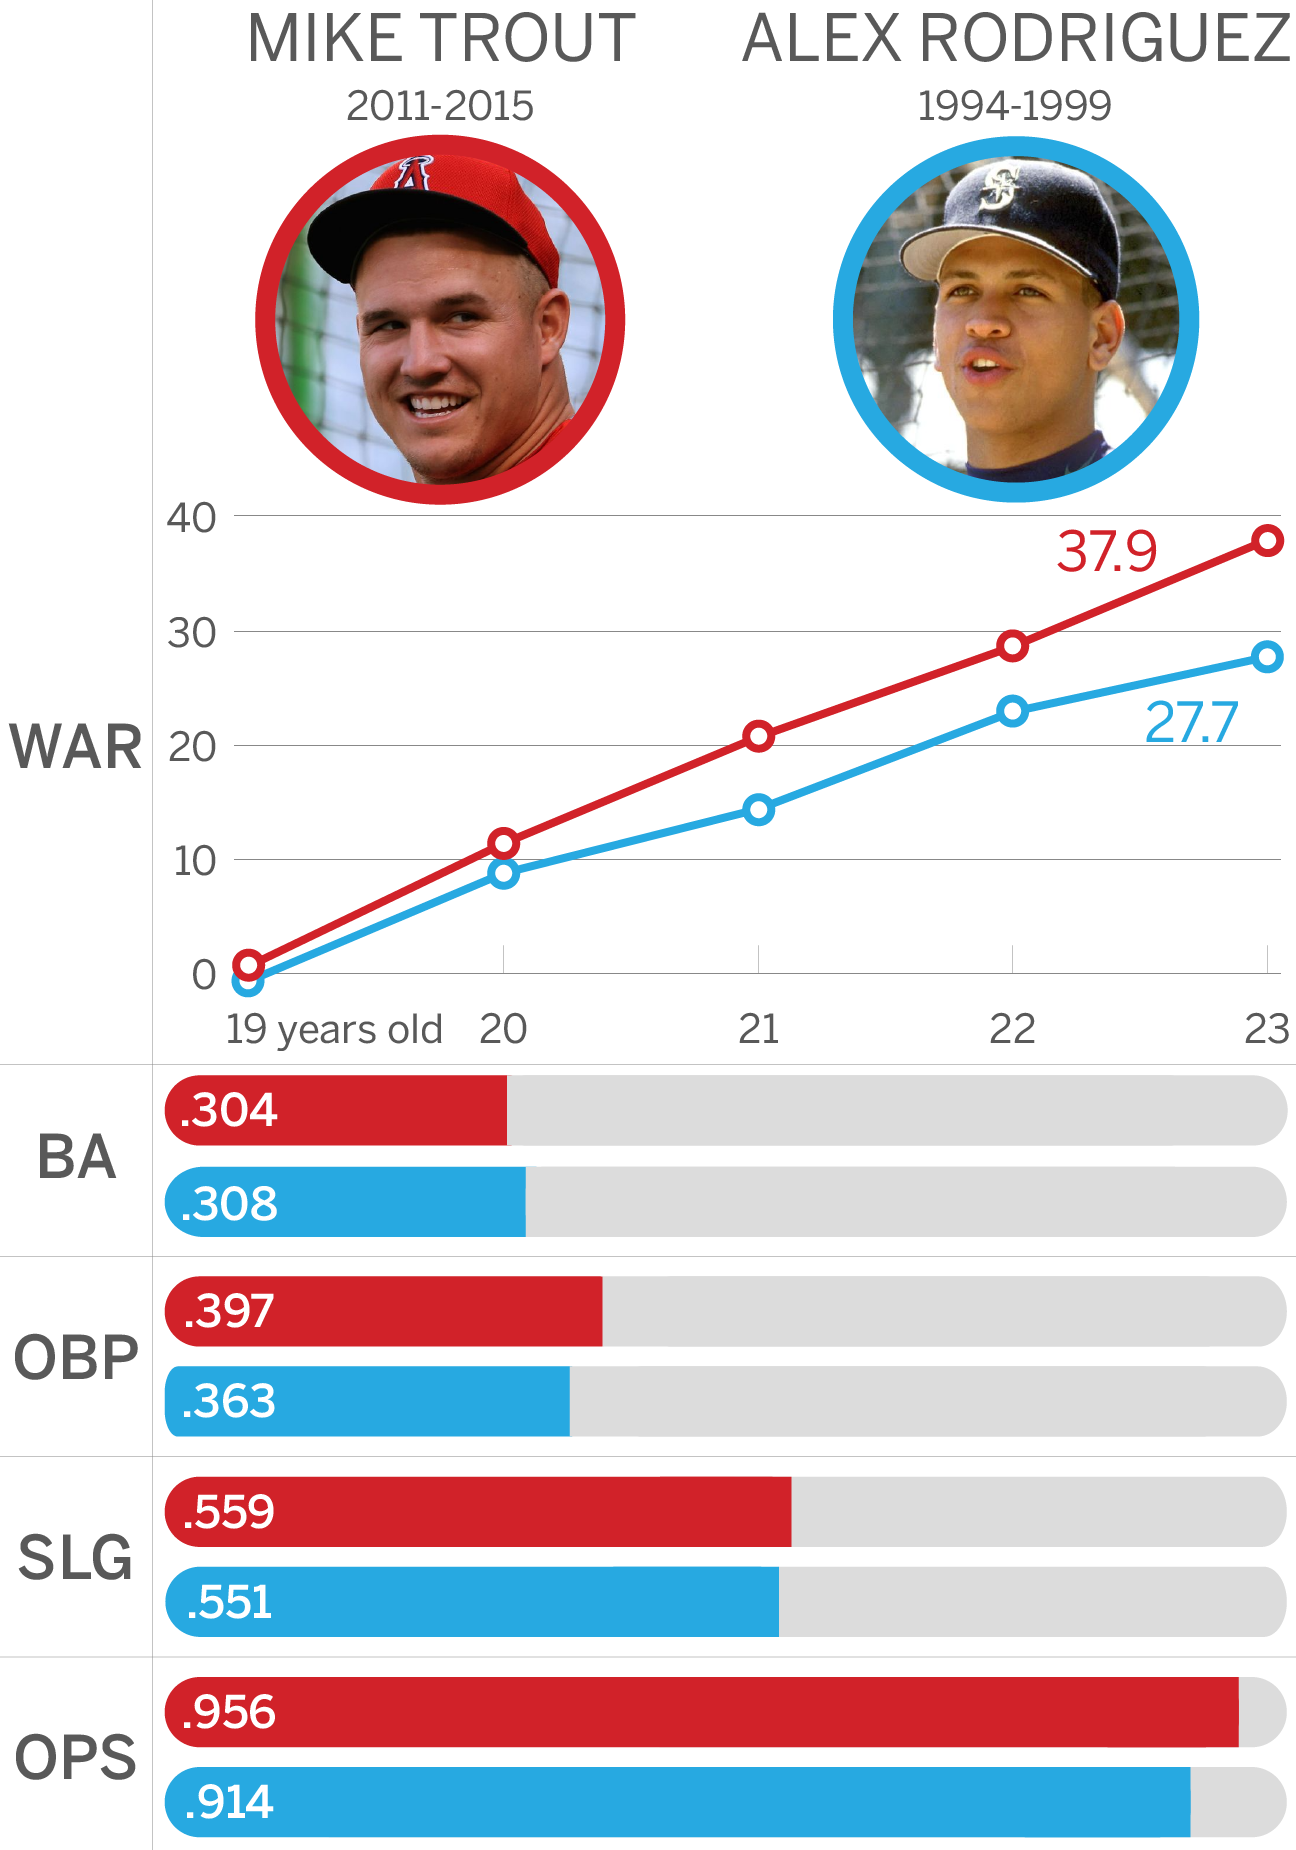 MLBRank infographic on Alex Rodriguez and Mike Trout - ESPN